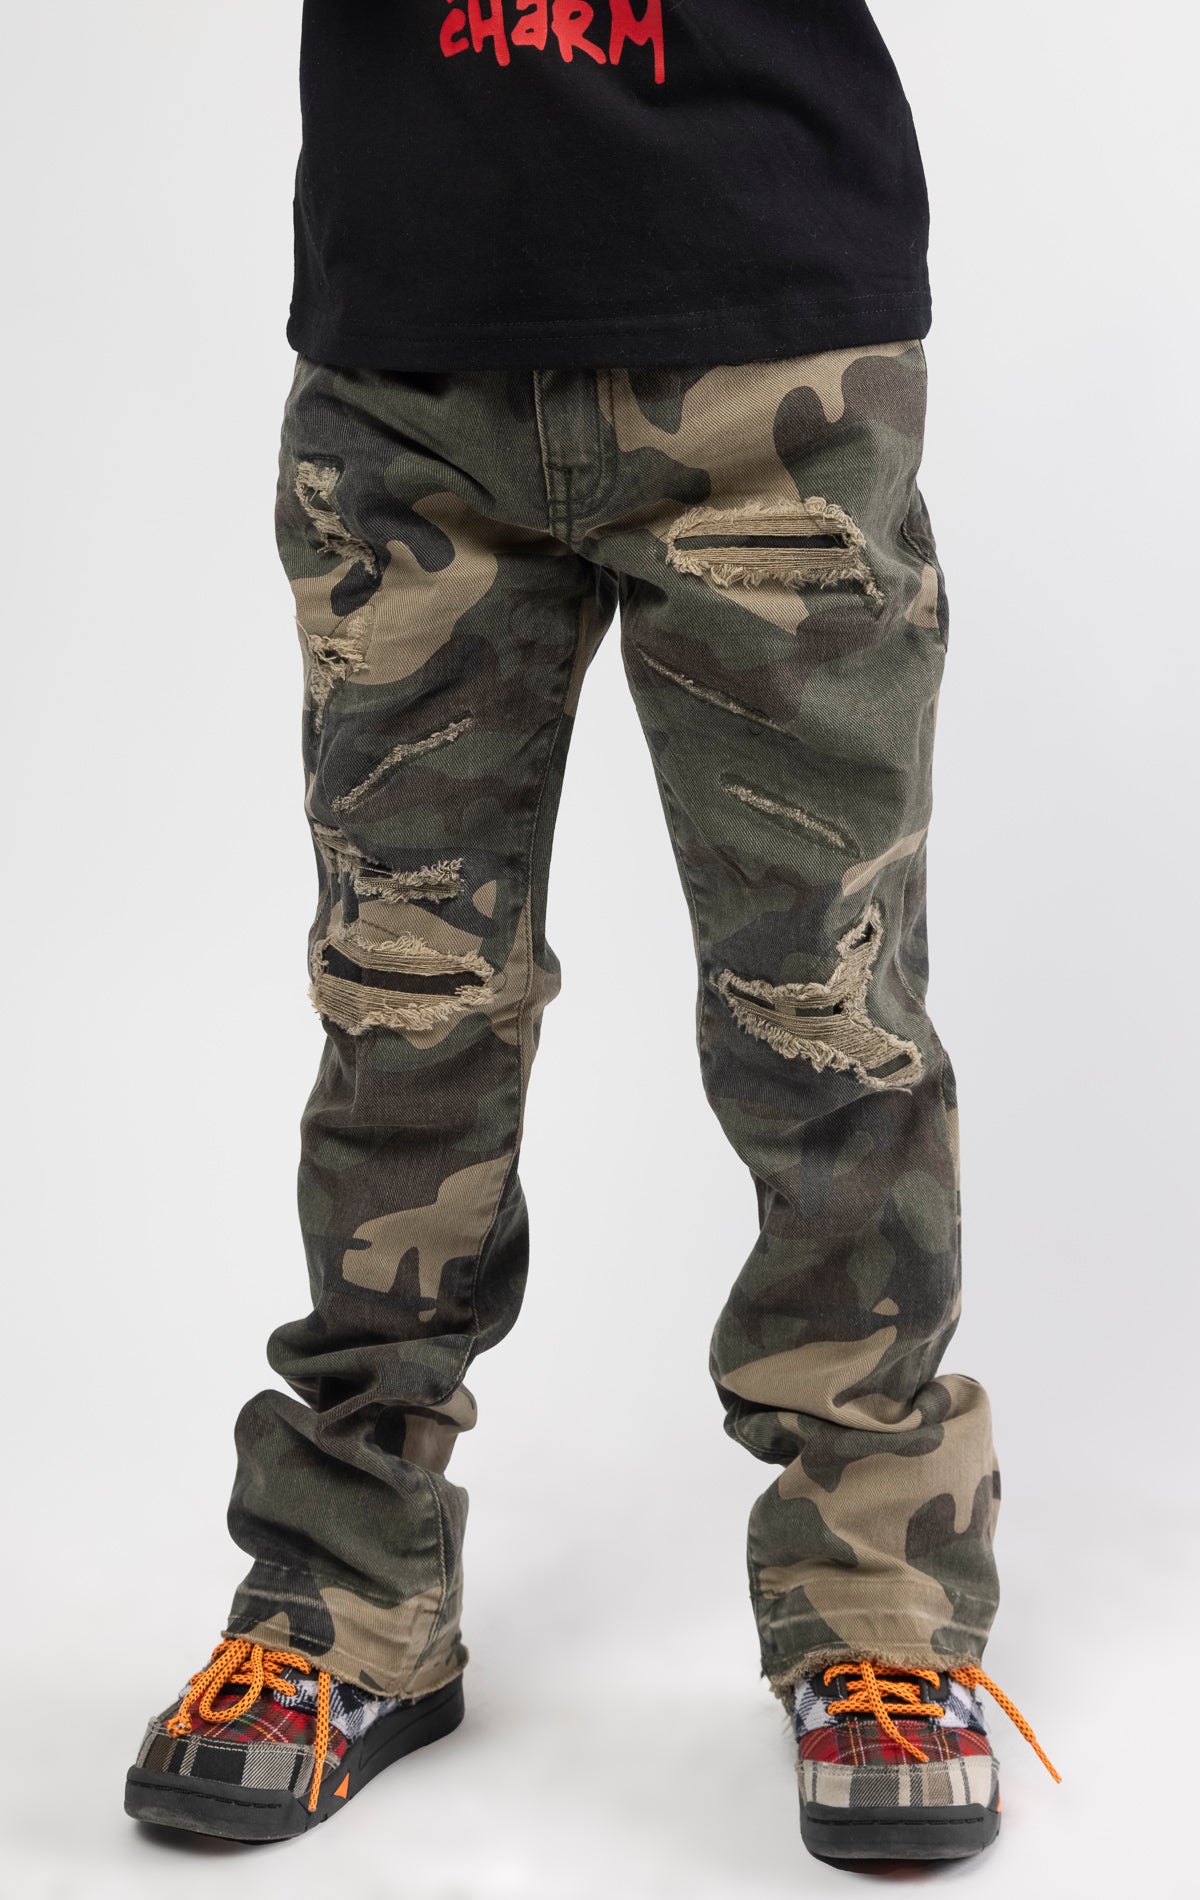 Woodland / Camo Extended length flare pants for maximum stacks.